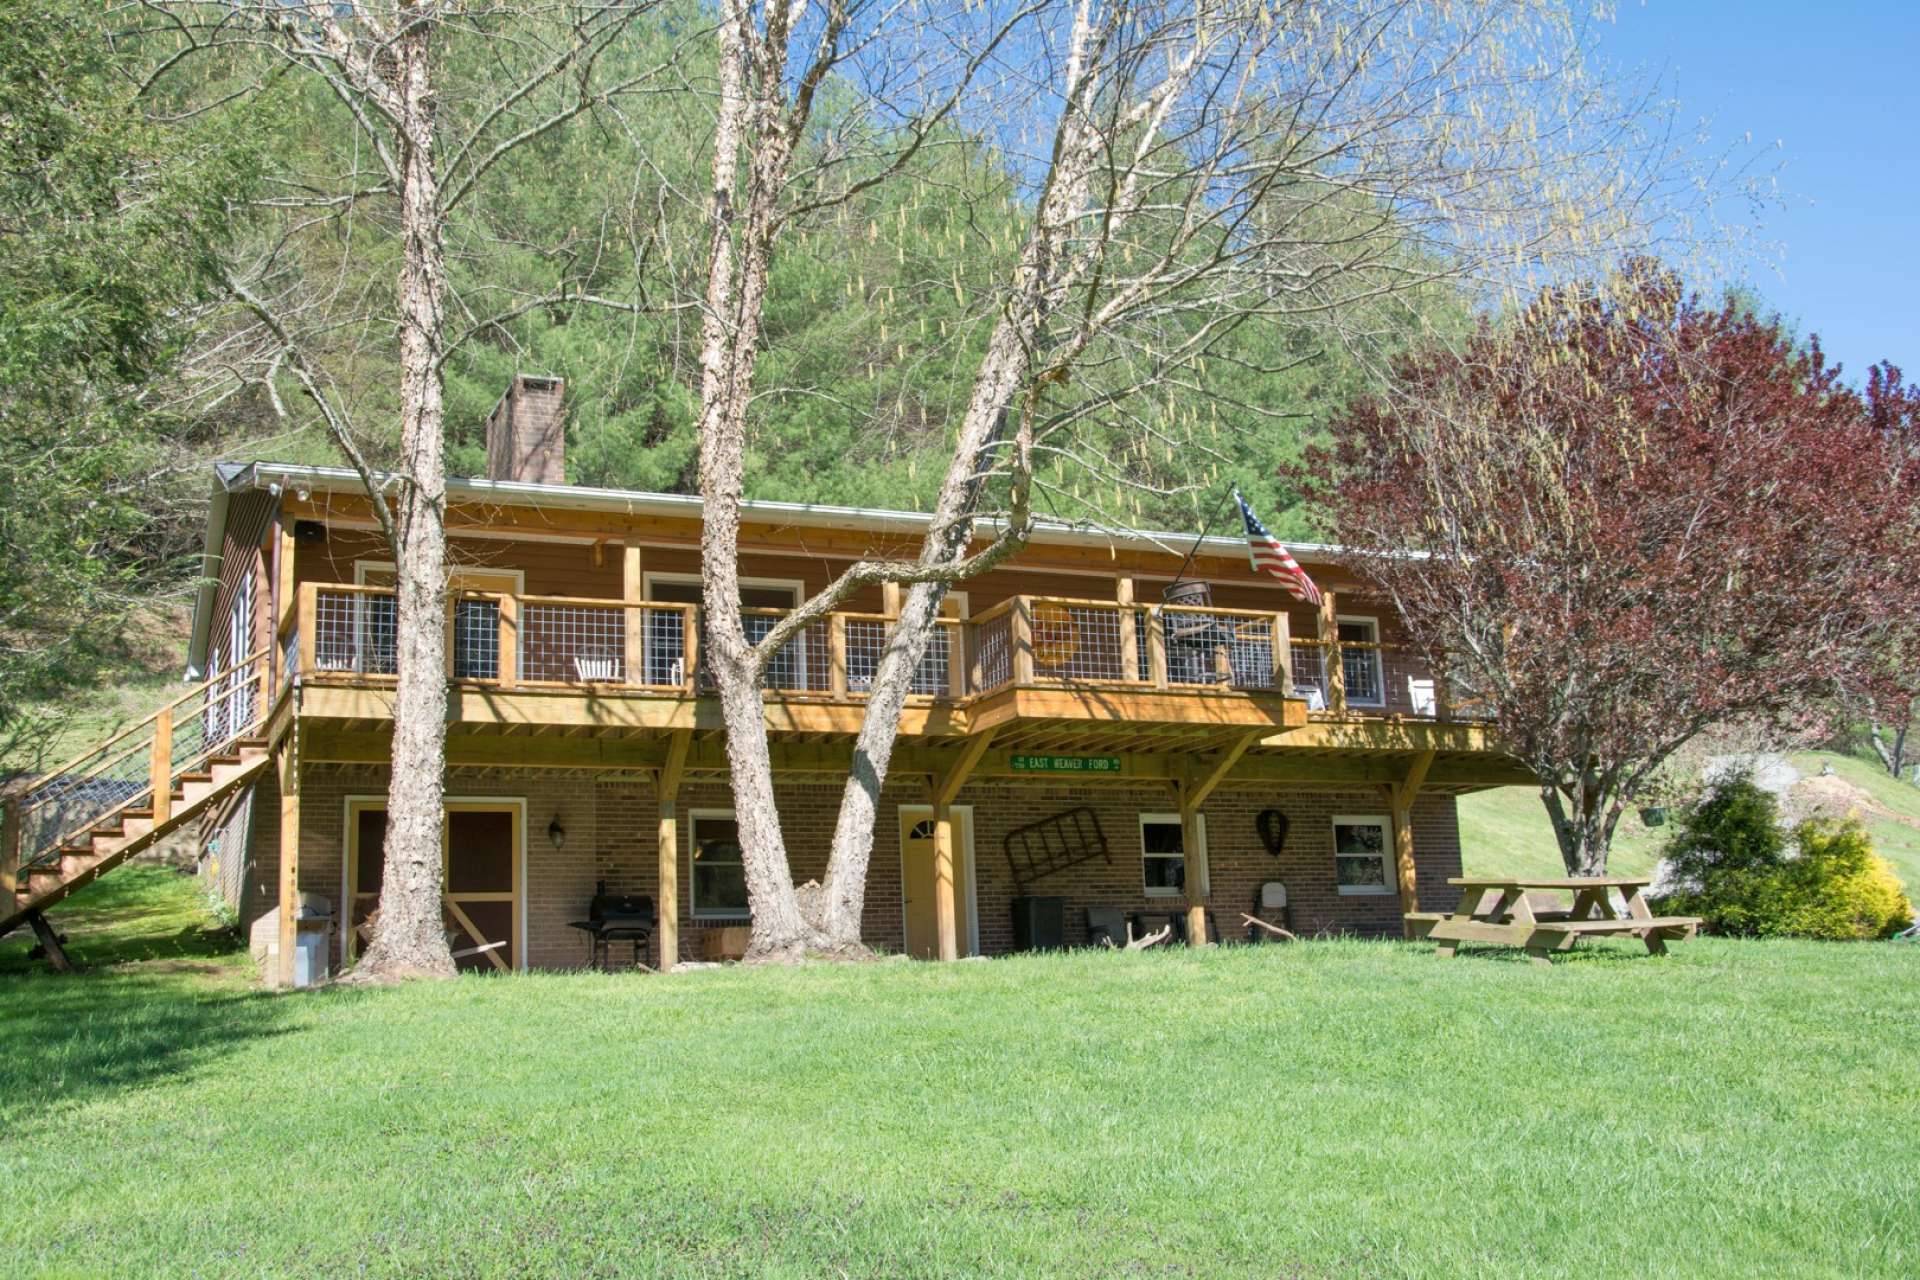 The full length back deck offers a wonderful place to enjoy the river views and entertain friends and family.